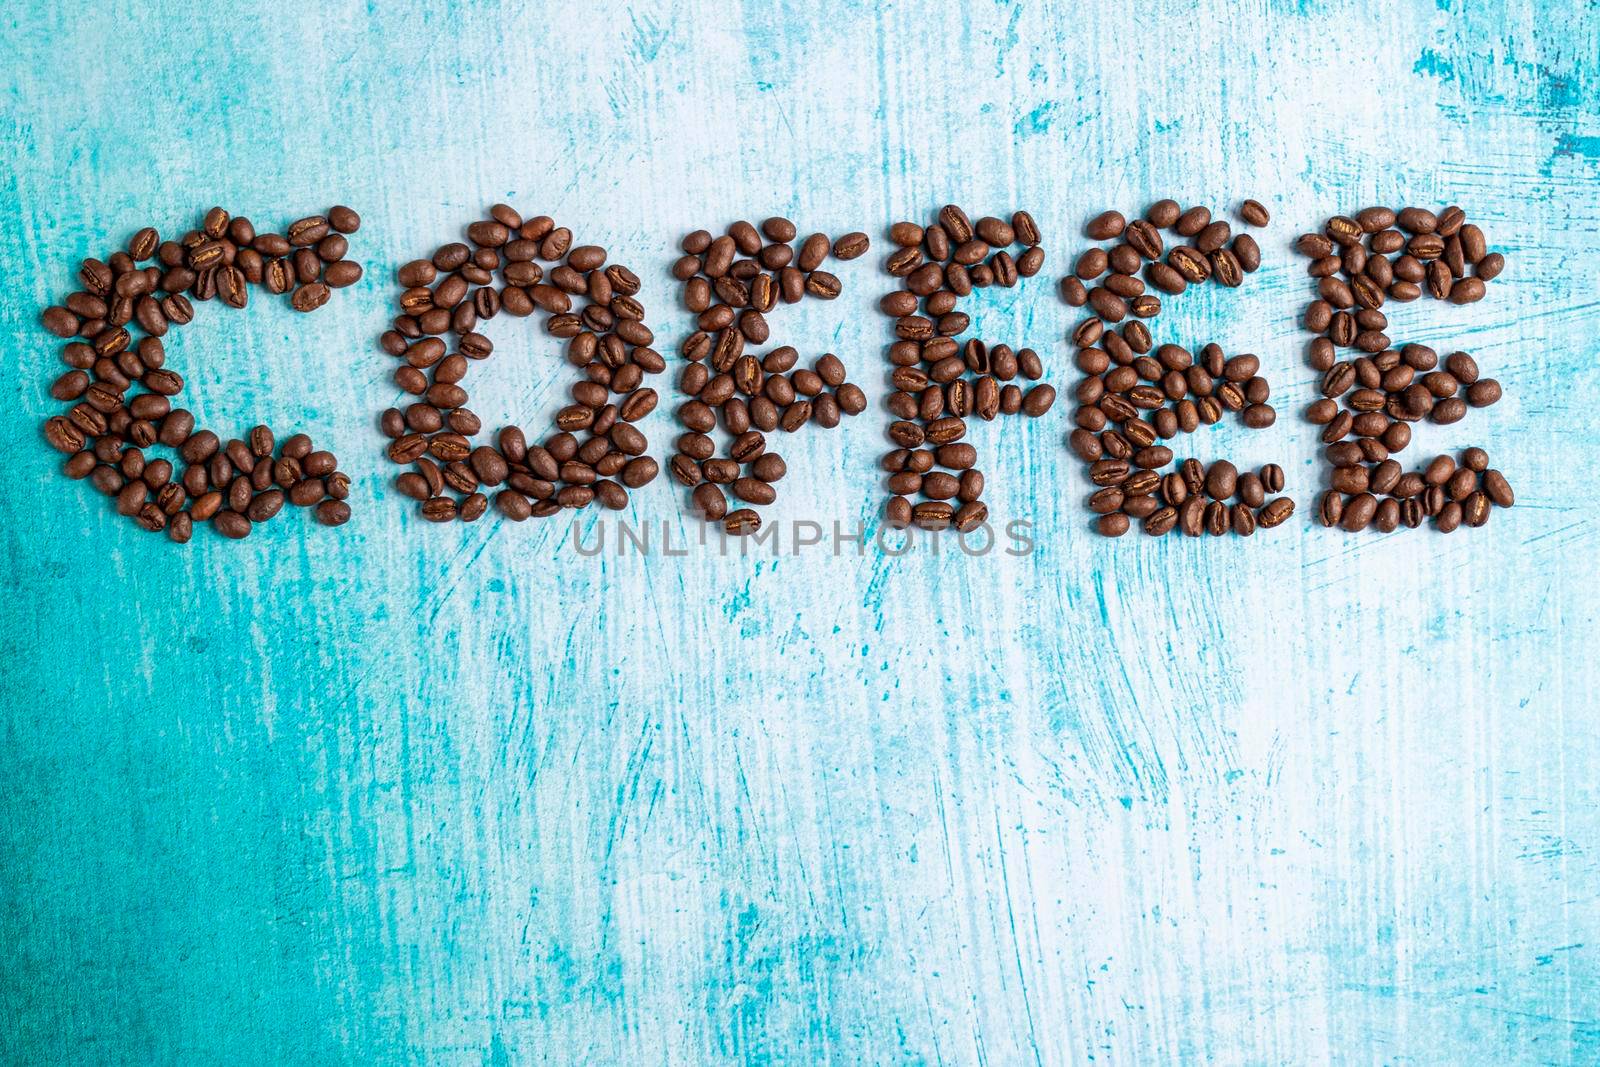 Roasted coffee grains on aquamarine background by eagg13